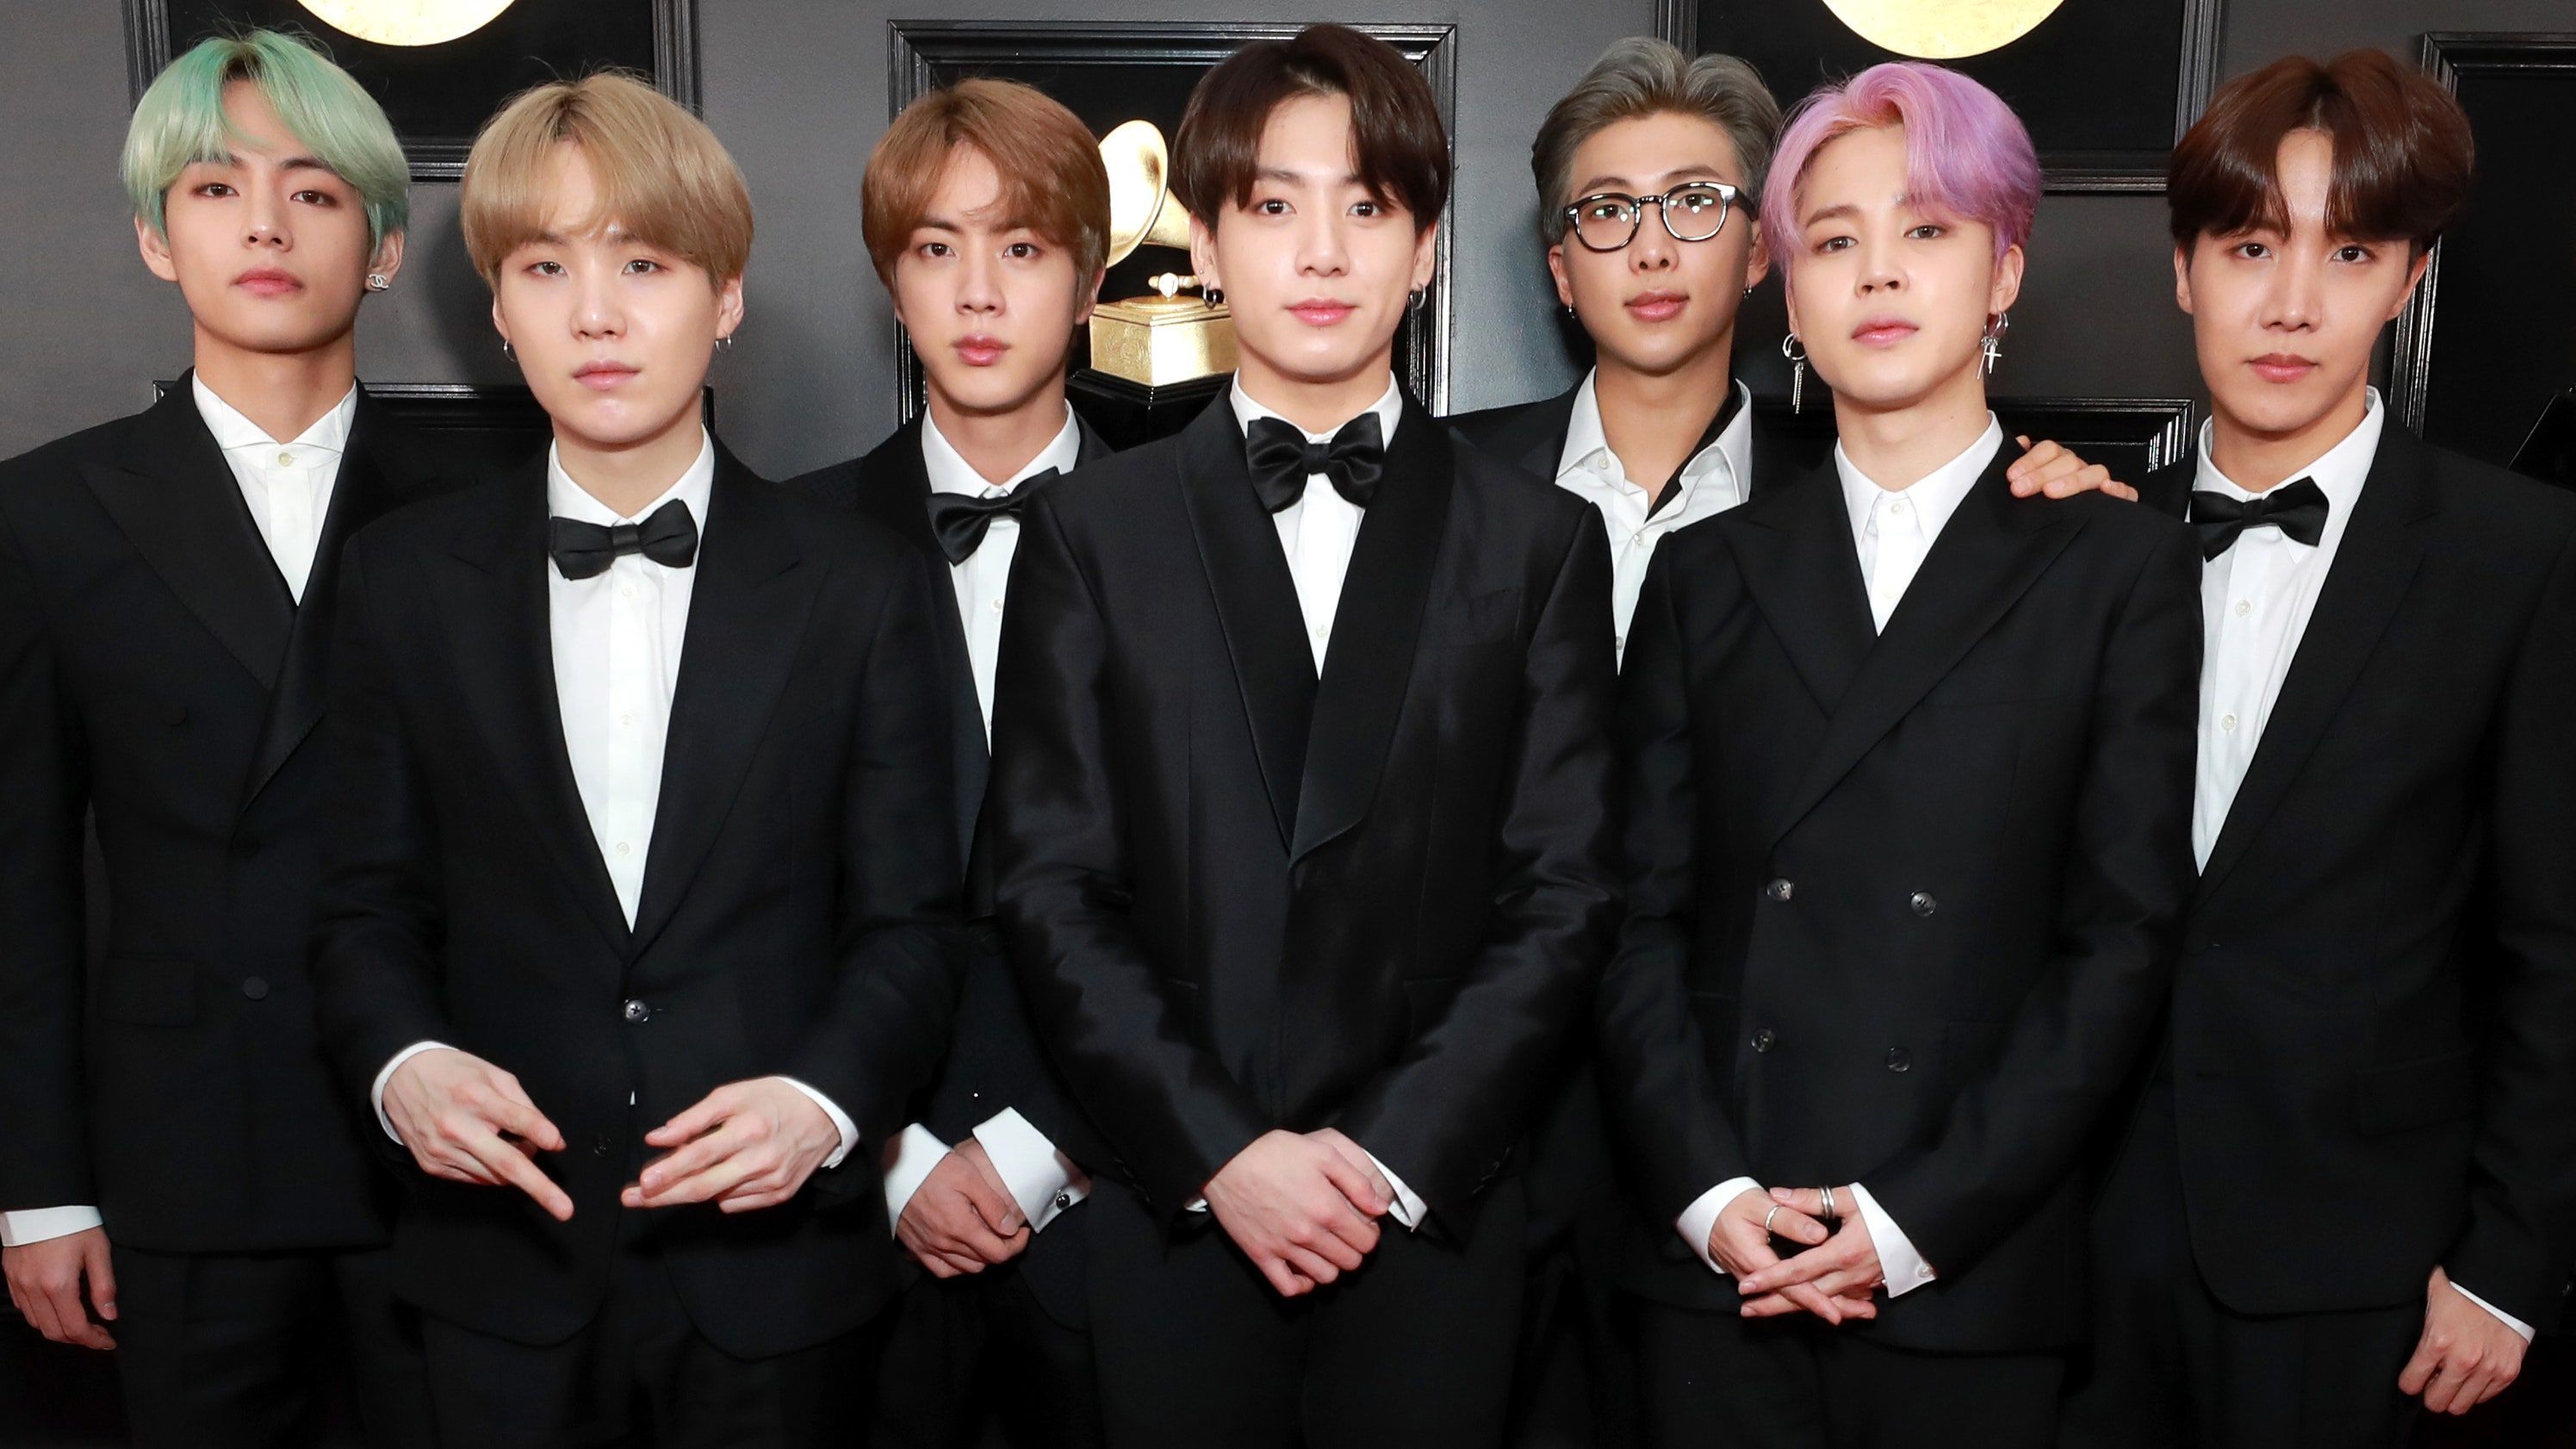 BTS has reportedly killed 5 people